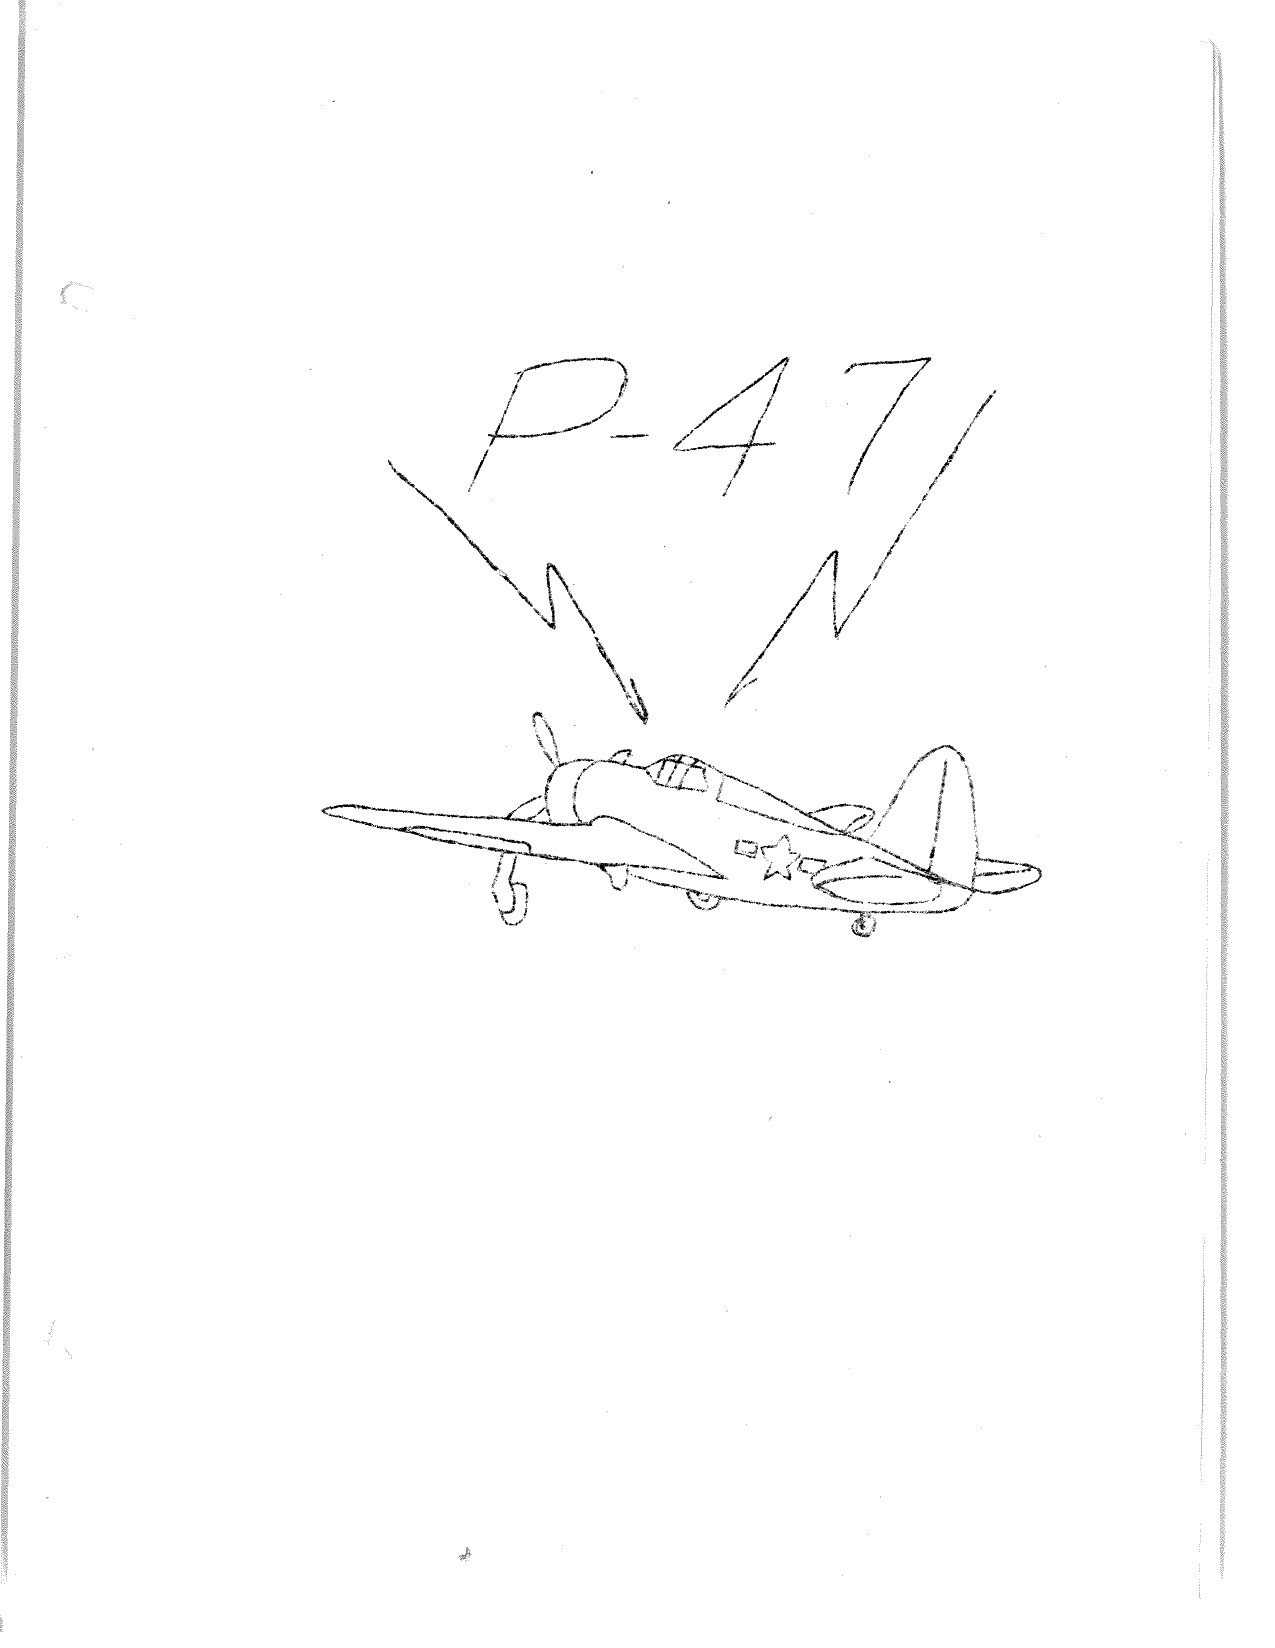 Sample page 1 from AirCorps Library document: Flight Manual for the P-47